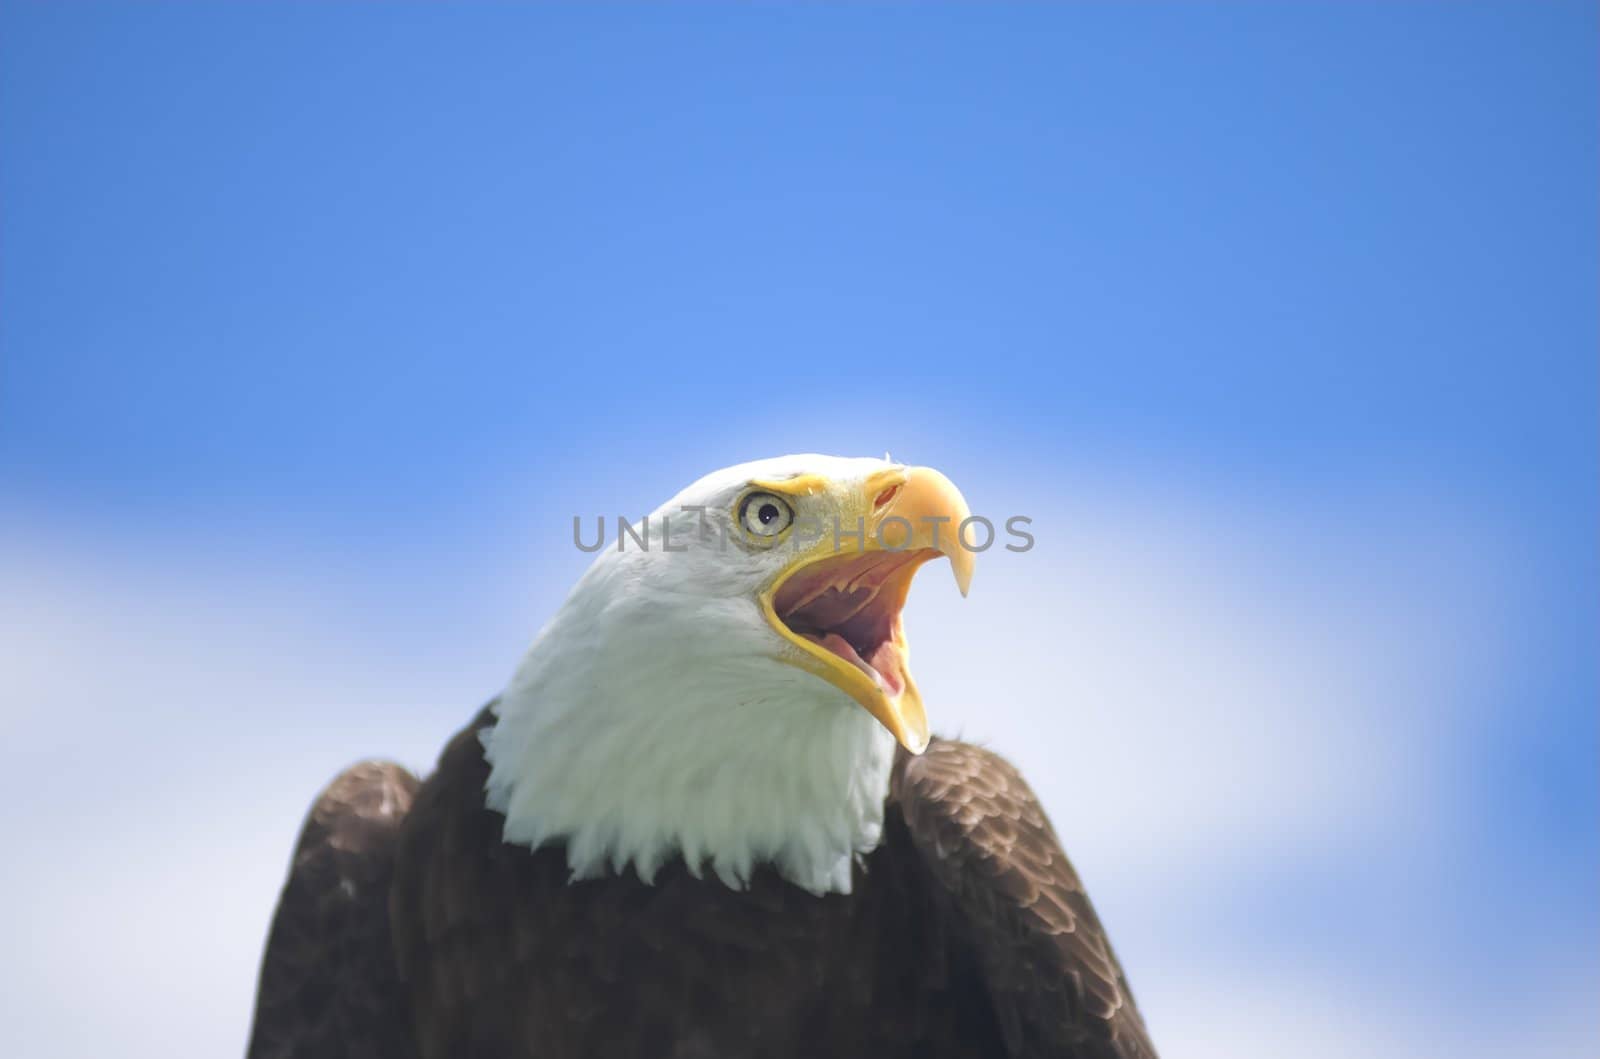 Bald Eagle screaming at something in the distance